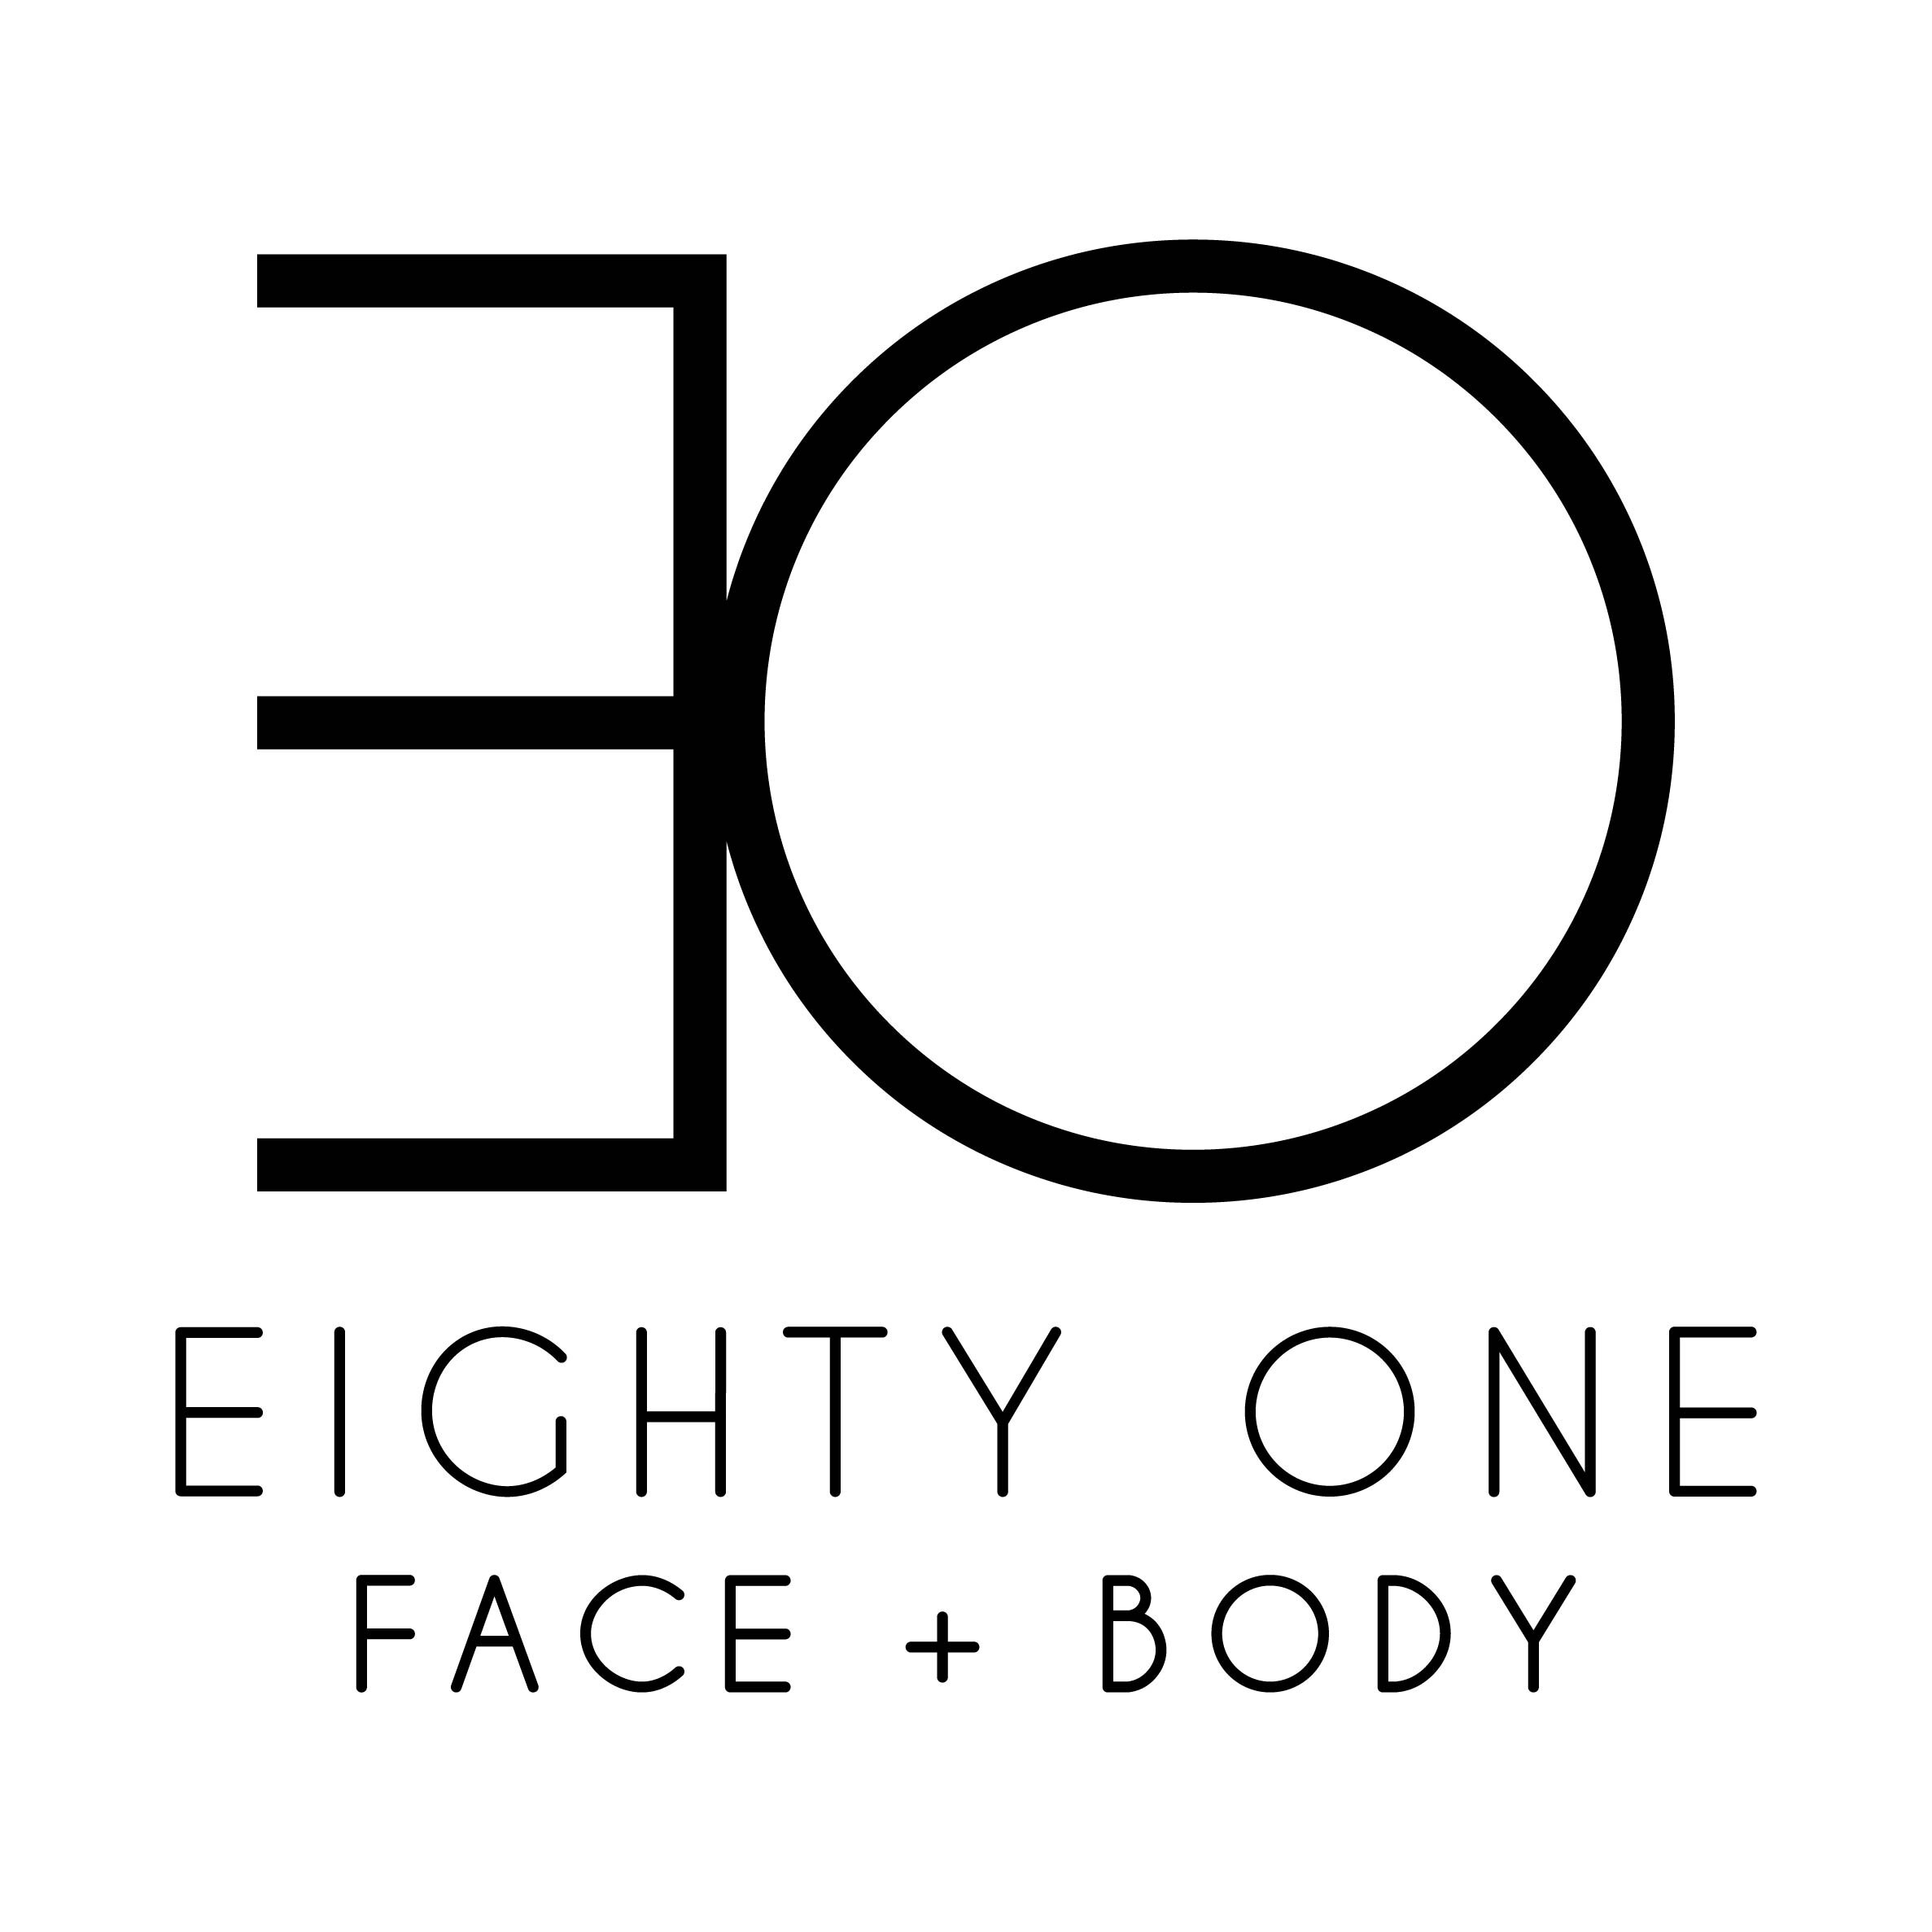 Eighty One Face + Body